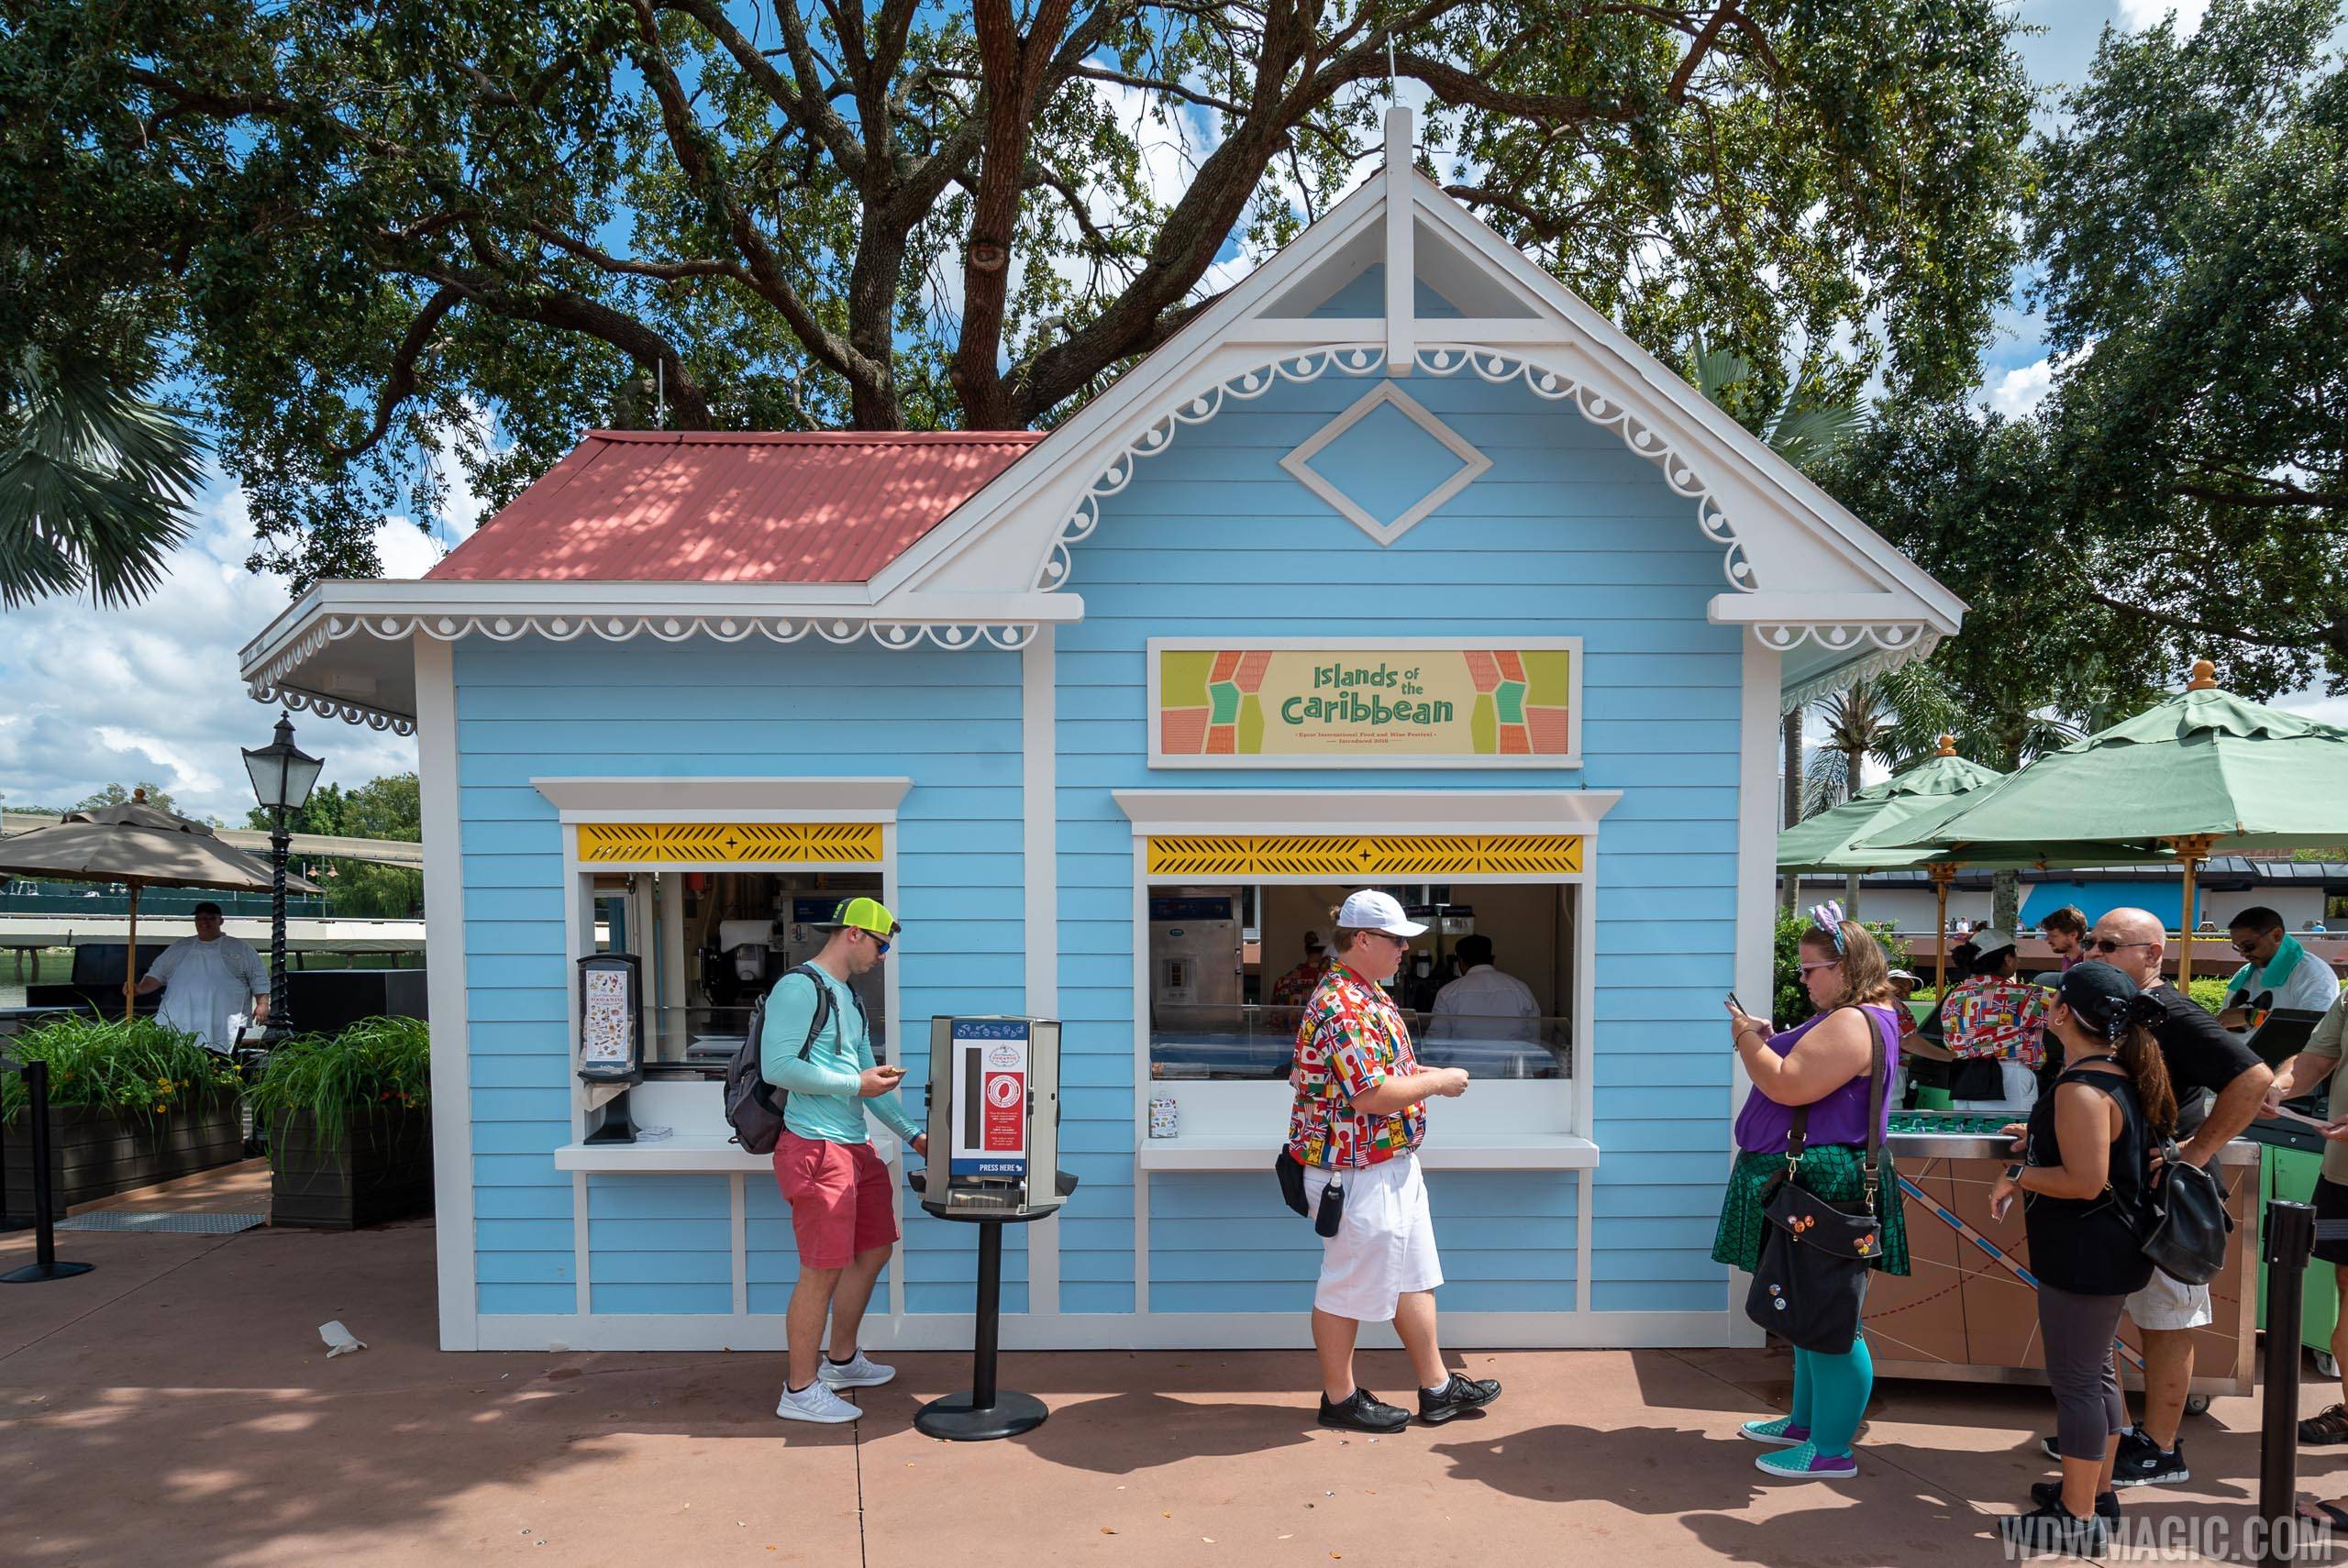 2019 Epcot Food and Wine Festival Marketplace kiosks, menus and pricing